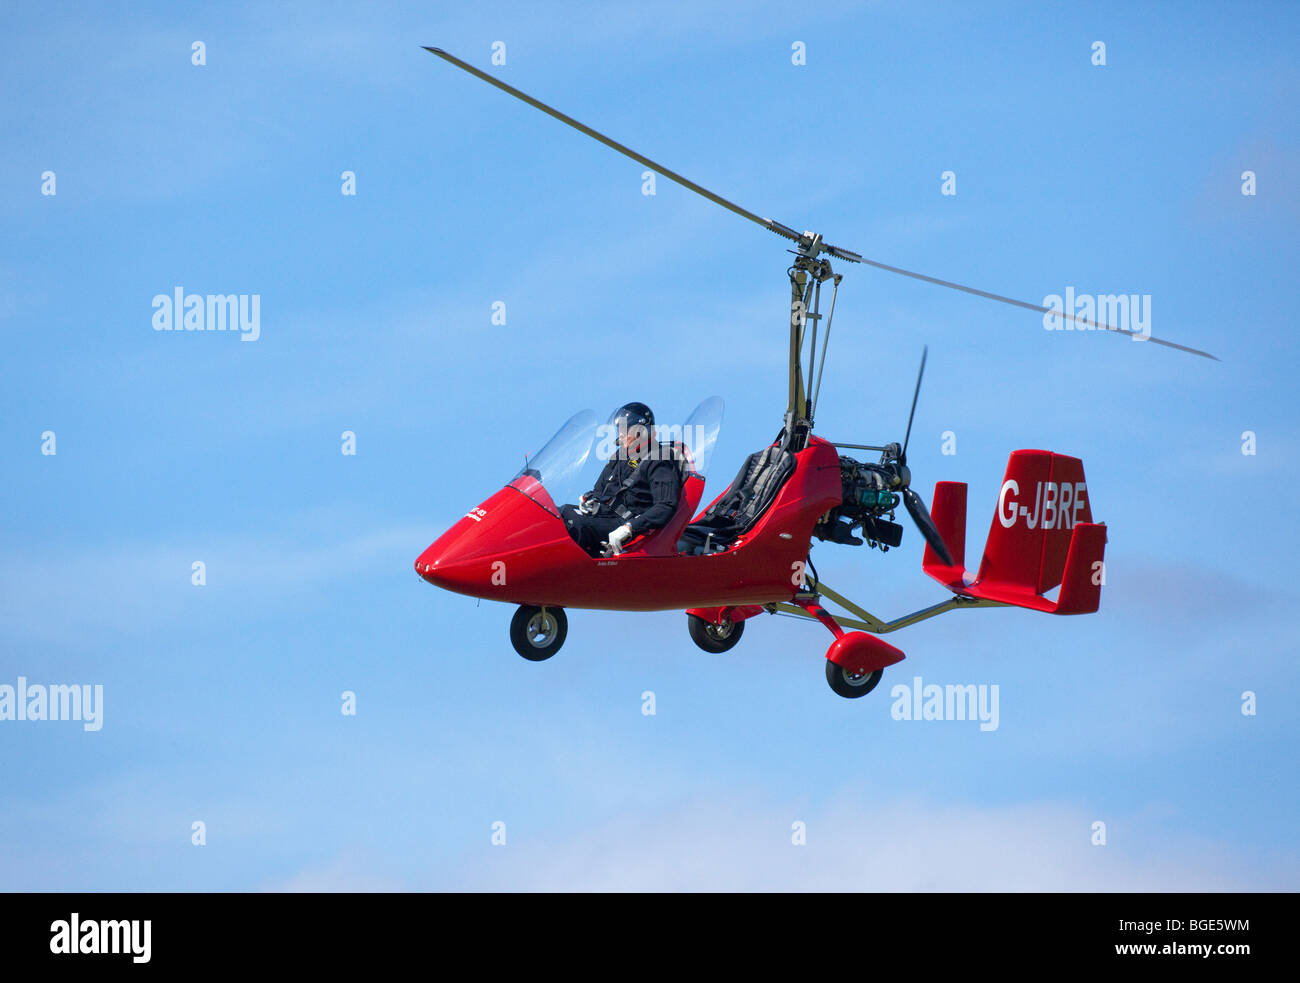 autogyro / gyroplane flying at an airshow Stock Photo